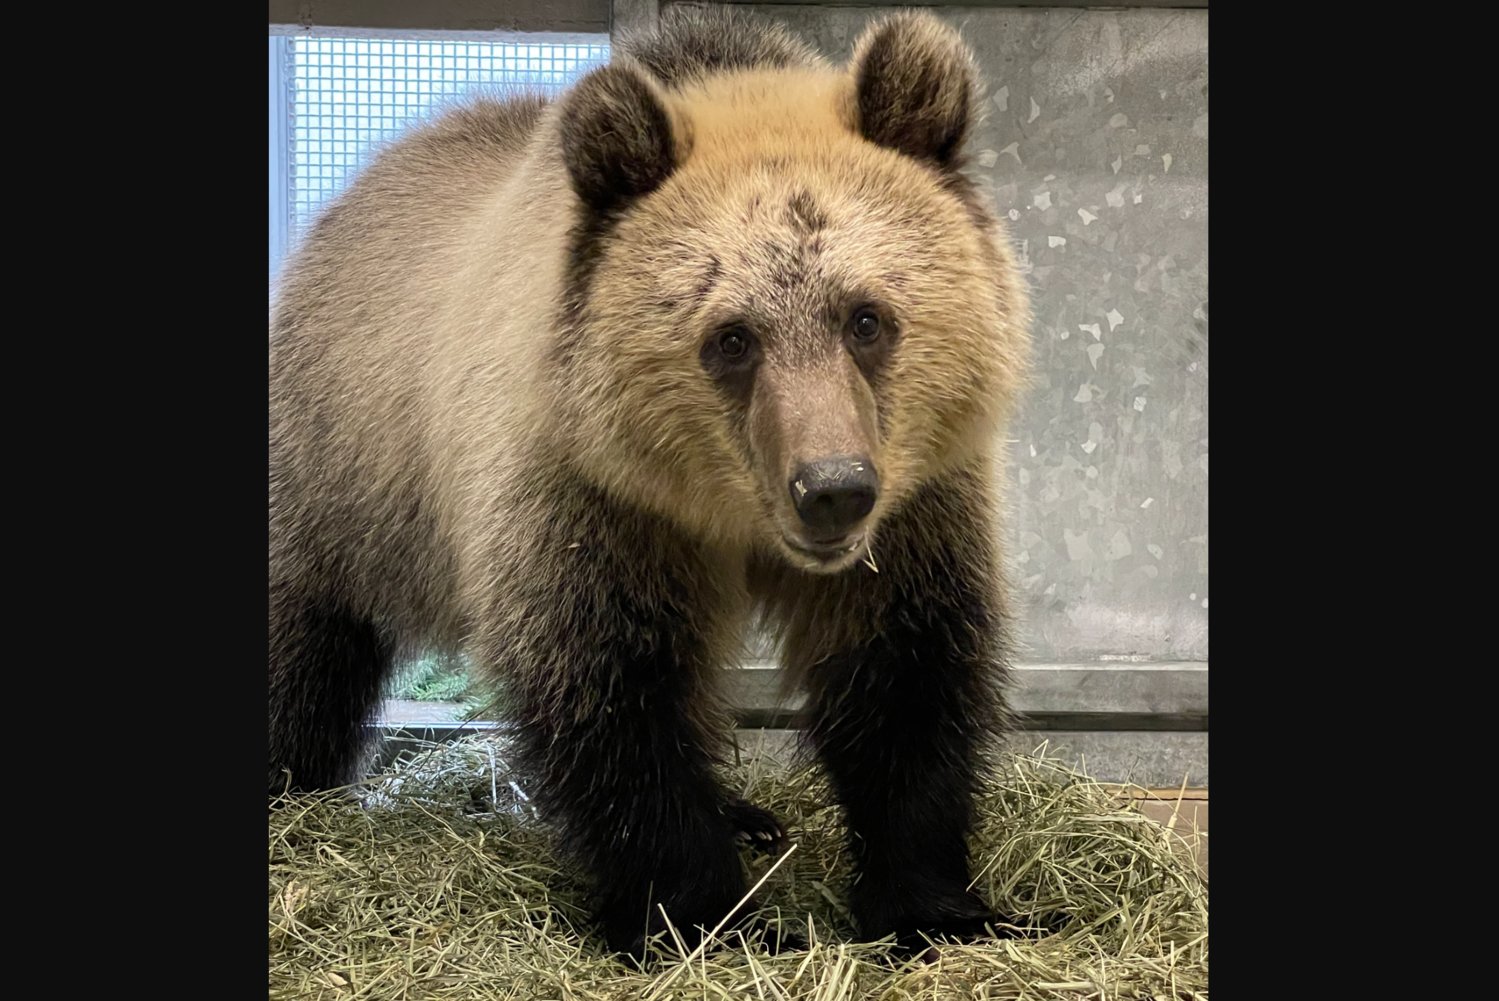 This female grizzly cub will be introduced to another orphaned cub, a brown bear named Juniper. The two of them will live together in the Living Northwest Trail bear habitat.